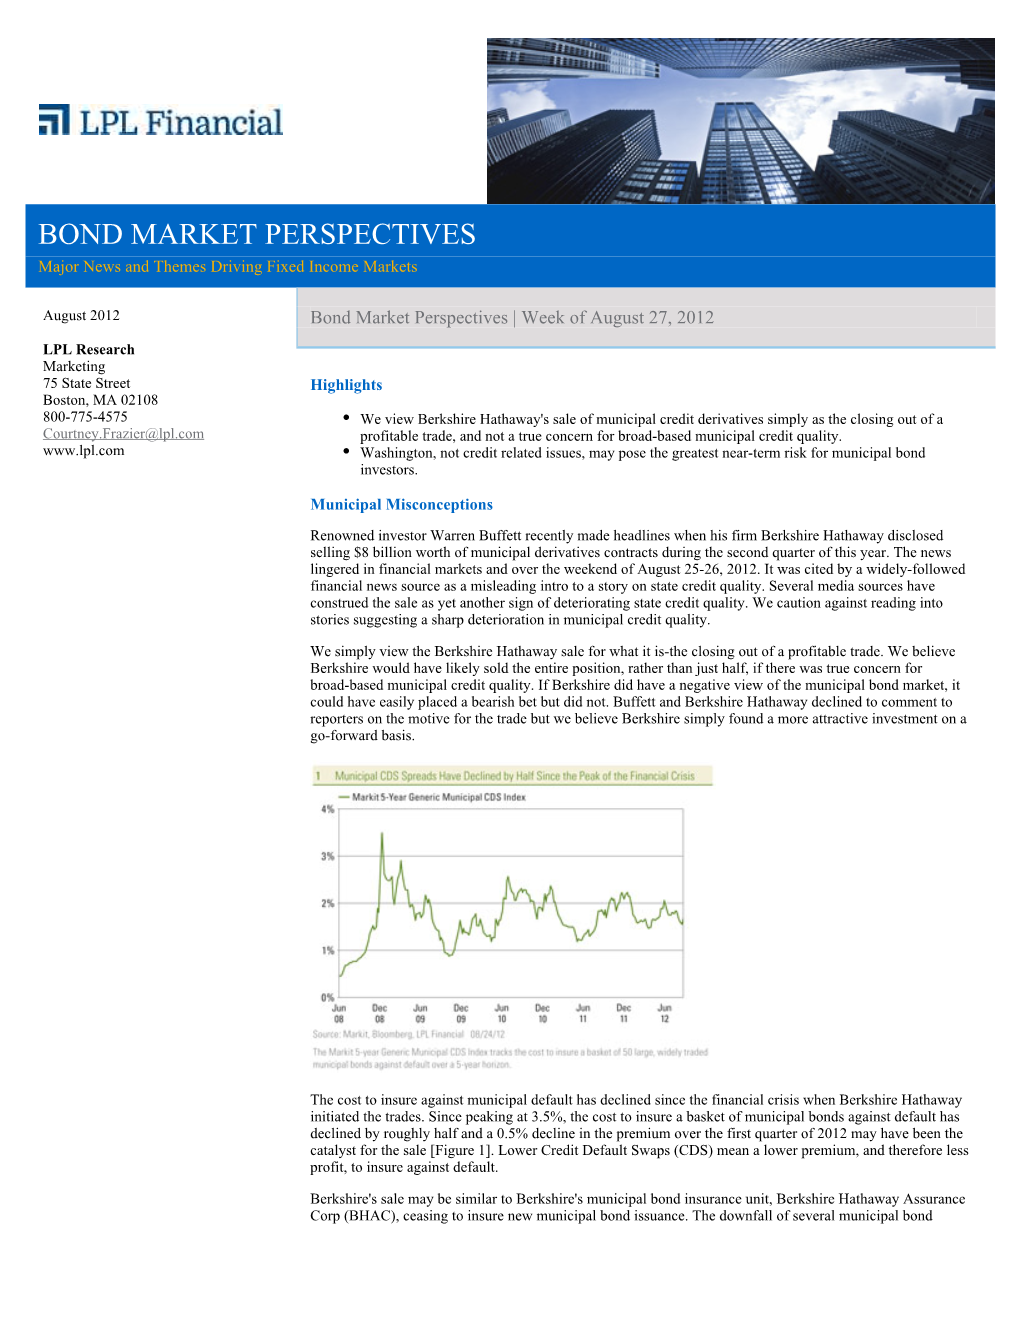 BOND MARKET PERSPECTIVES Major News and Themes Driving Fixed Income Markets